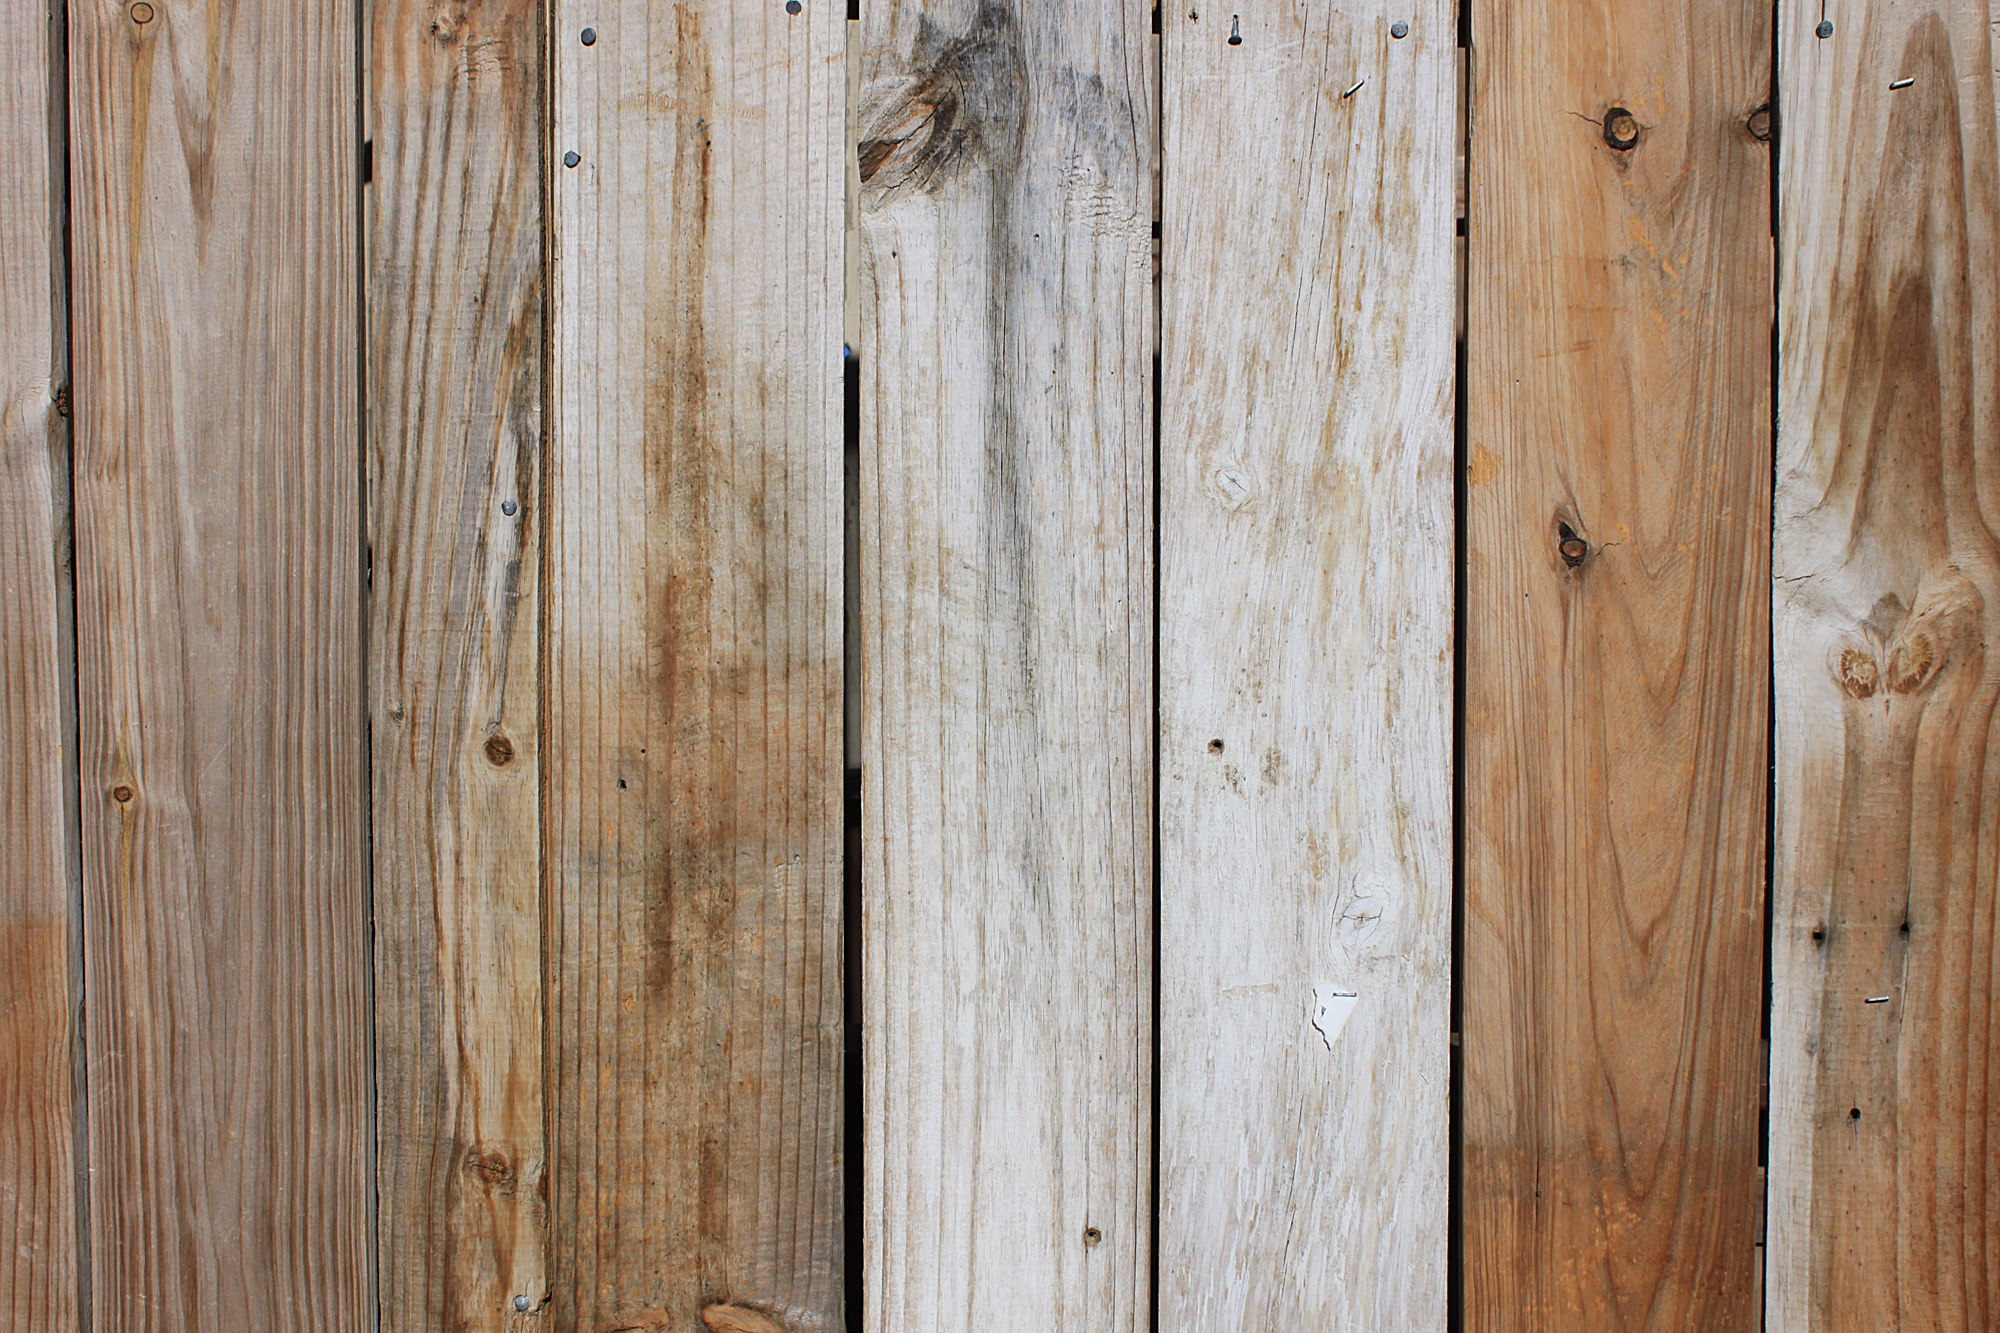 Rustic Wood Plank Texture Frame PPT Backgrounds